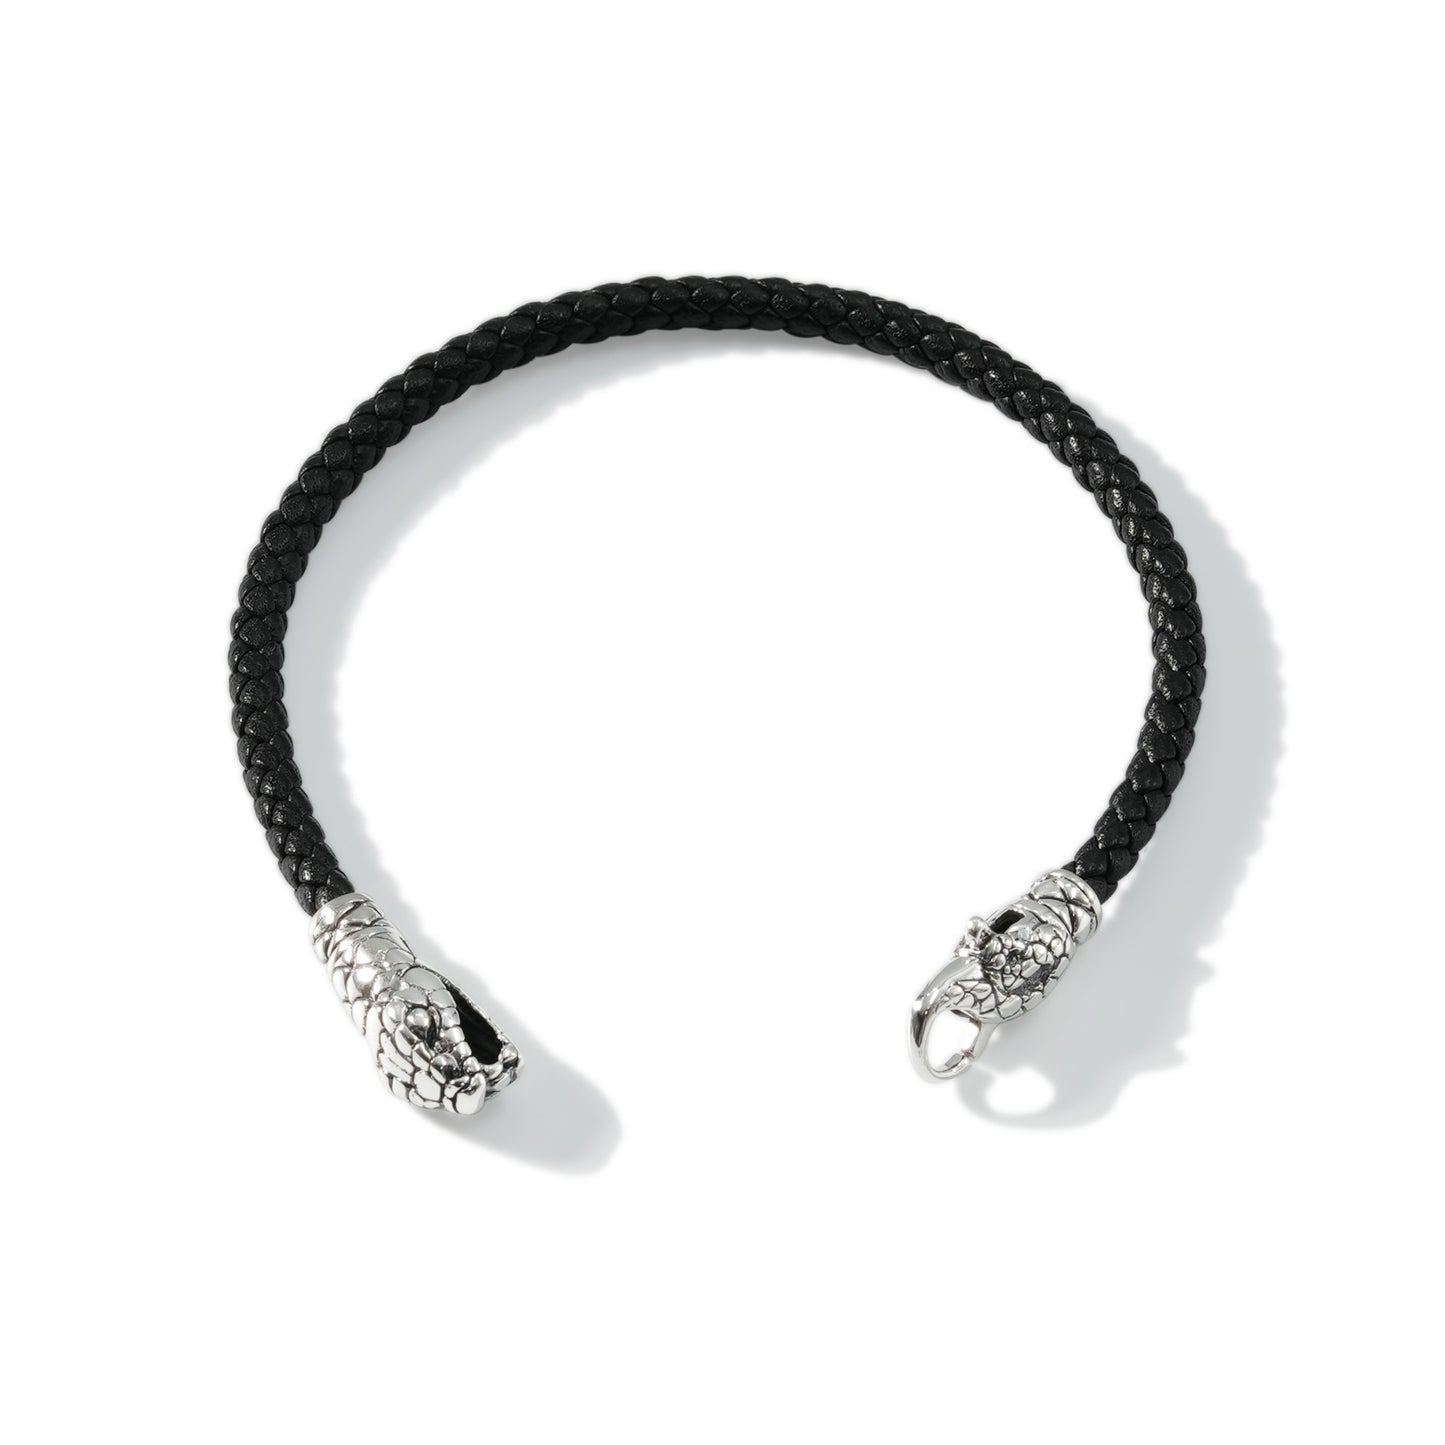 BRACELET LEATHER SNAKE HEAD WITH CLASP